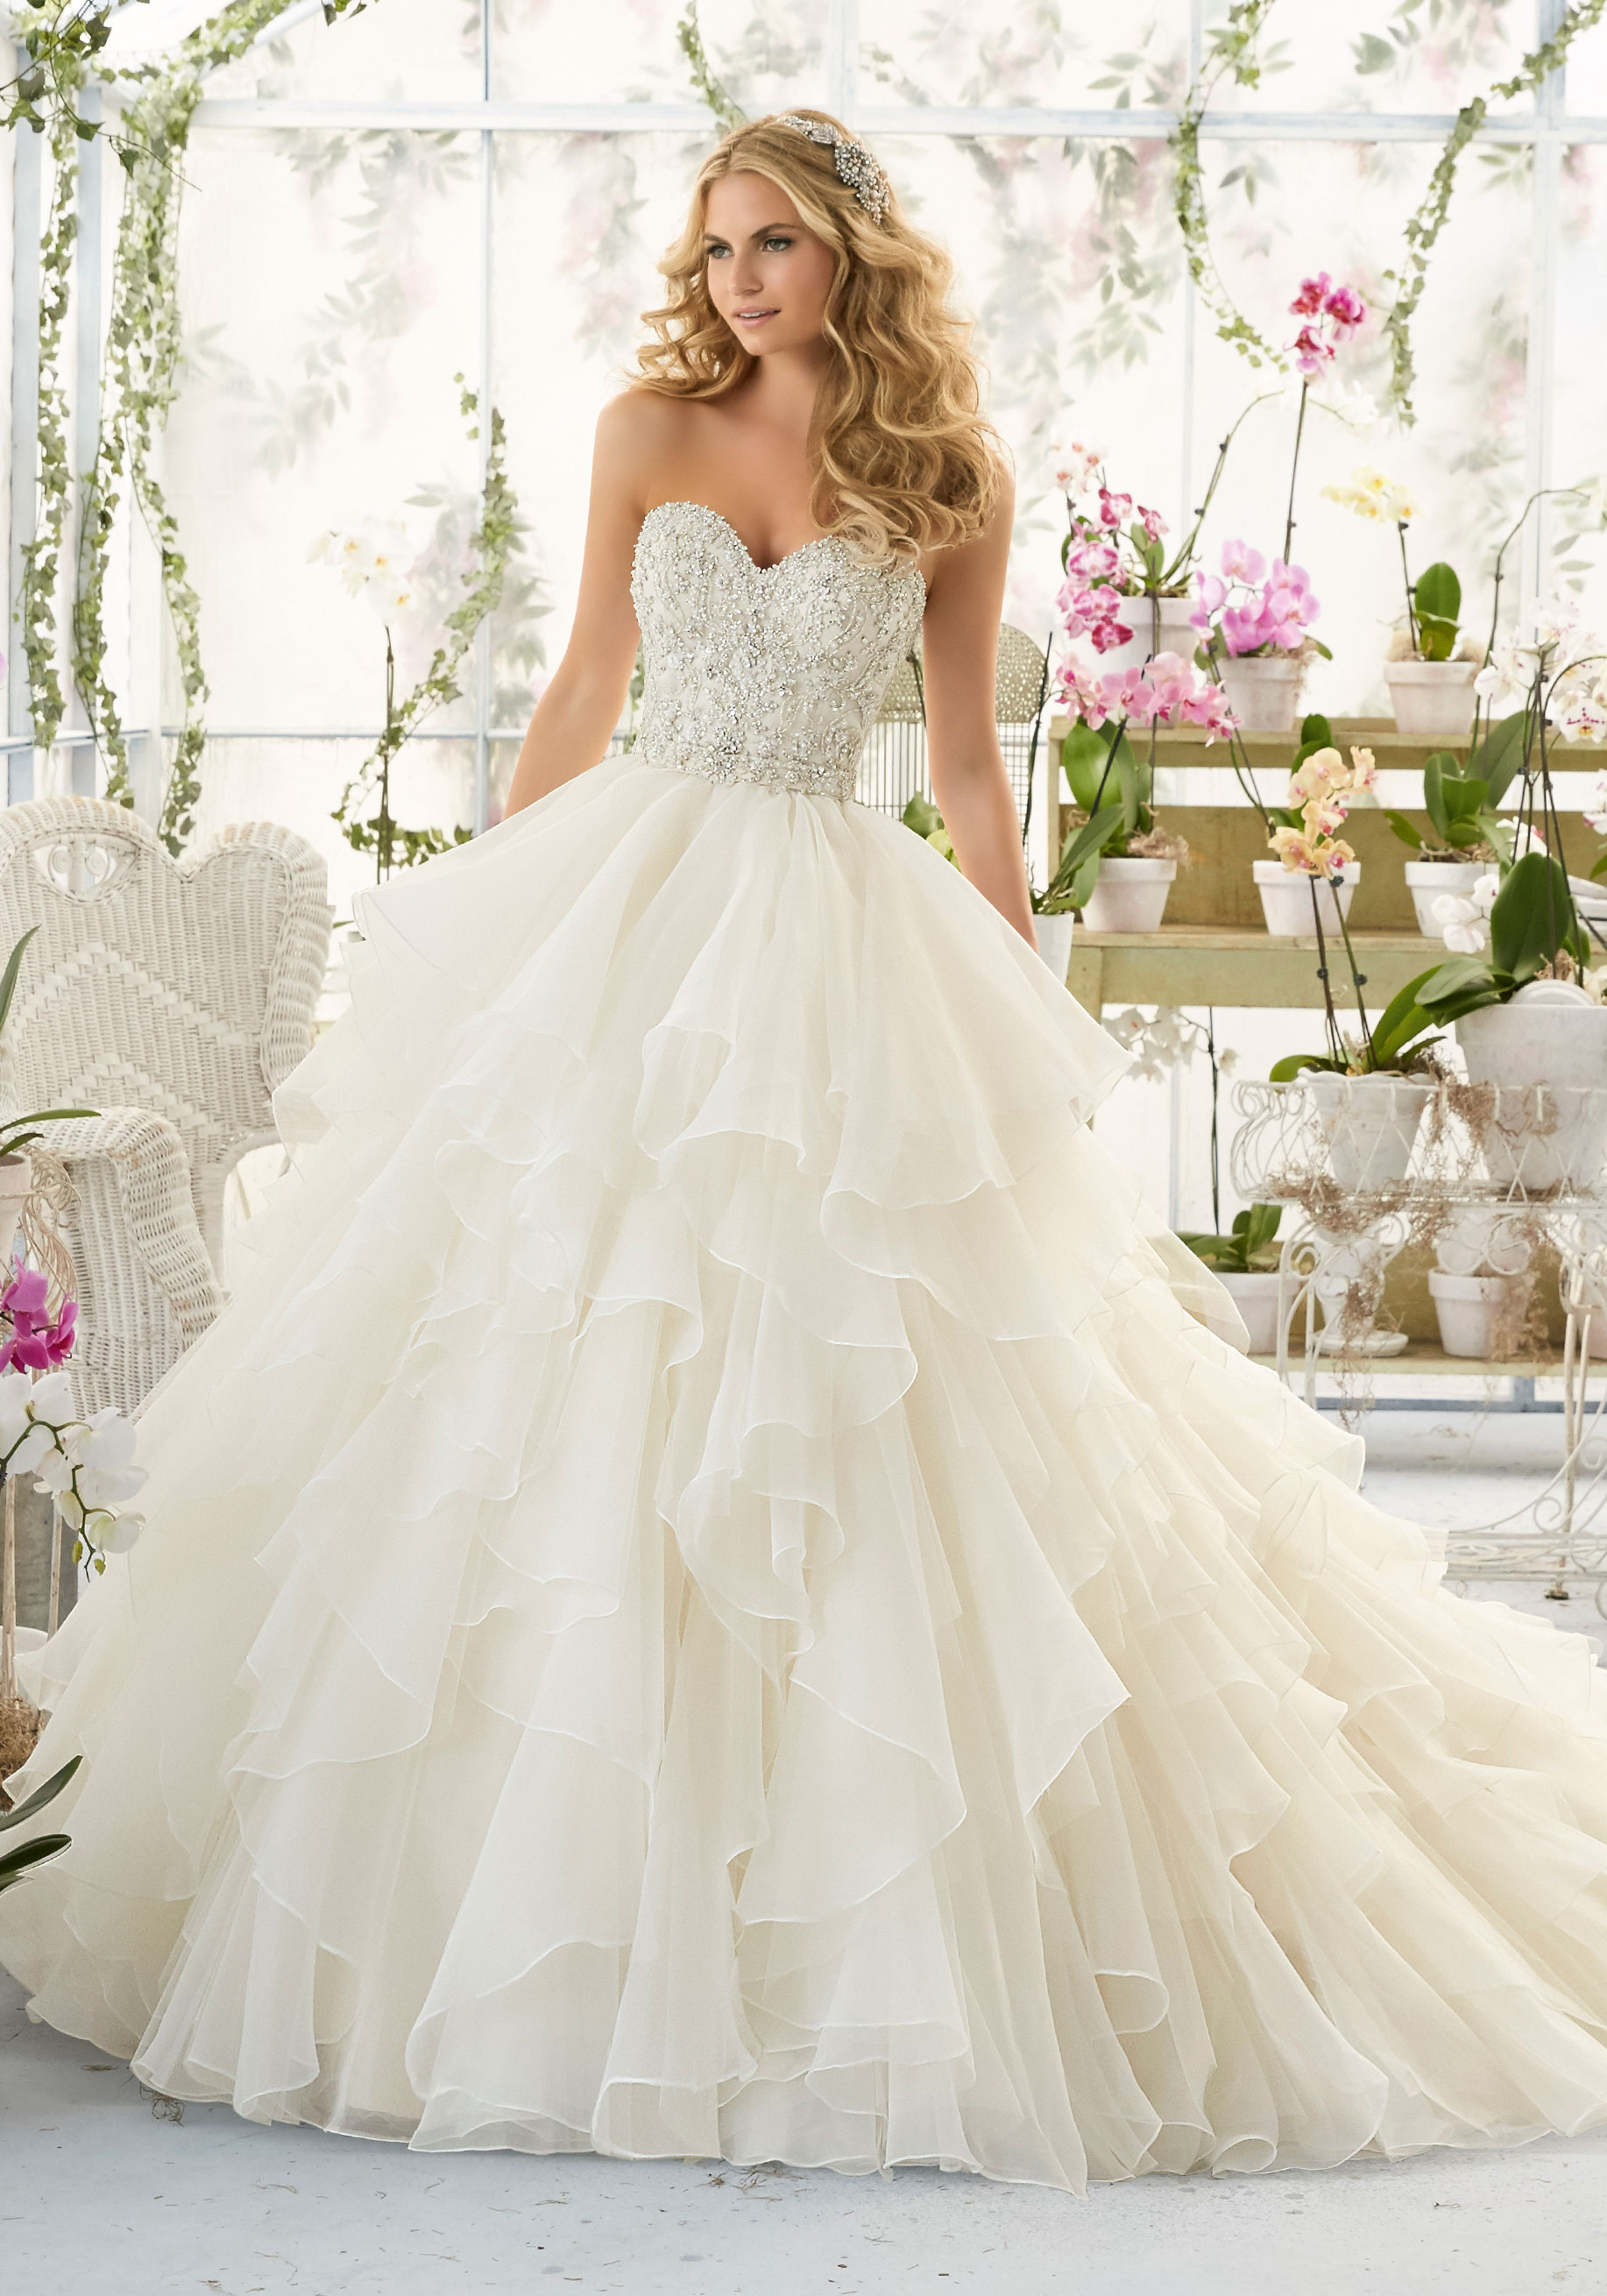 Great Wedding Dresses Free Returns of the decade The ultimate guide 